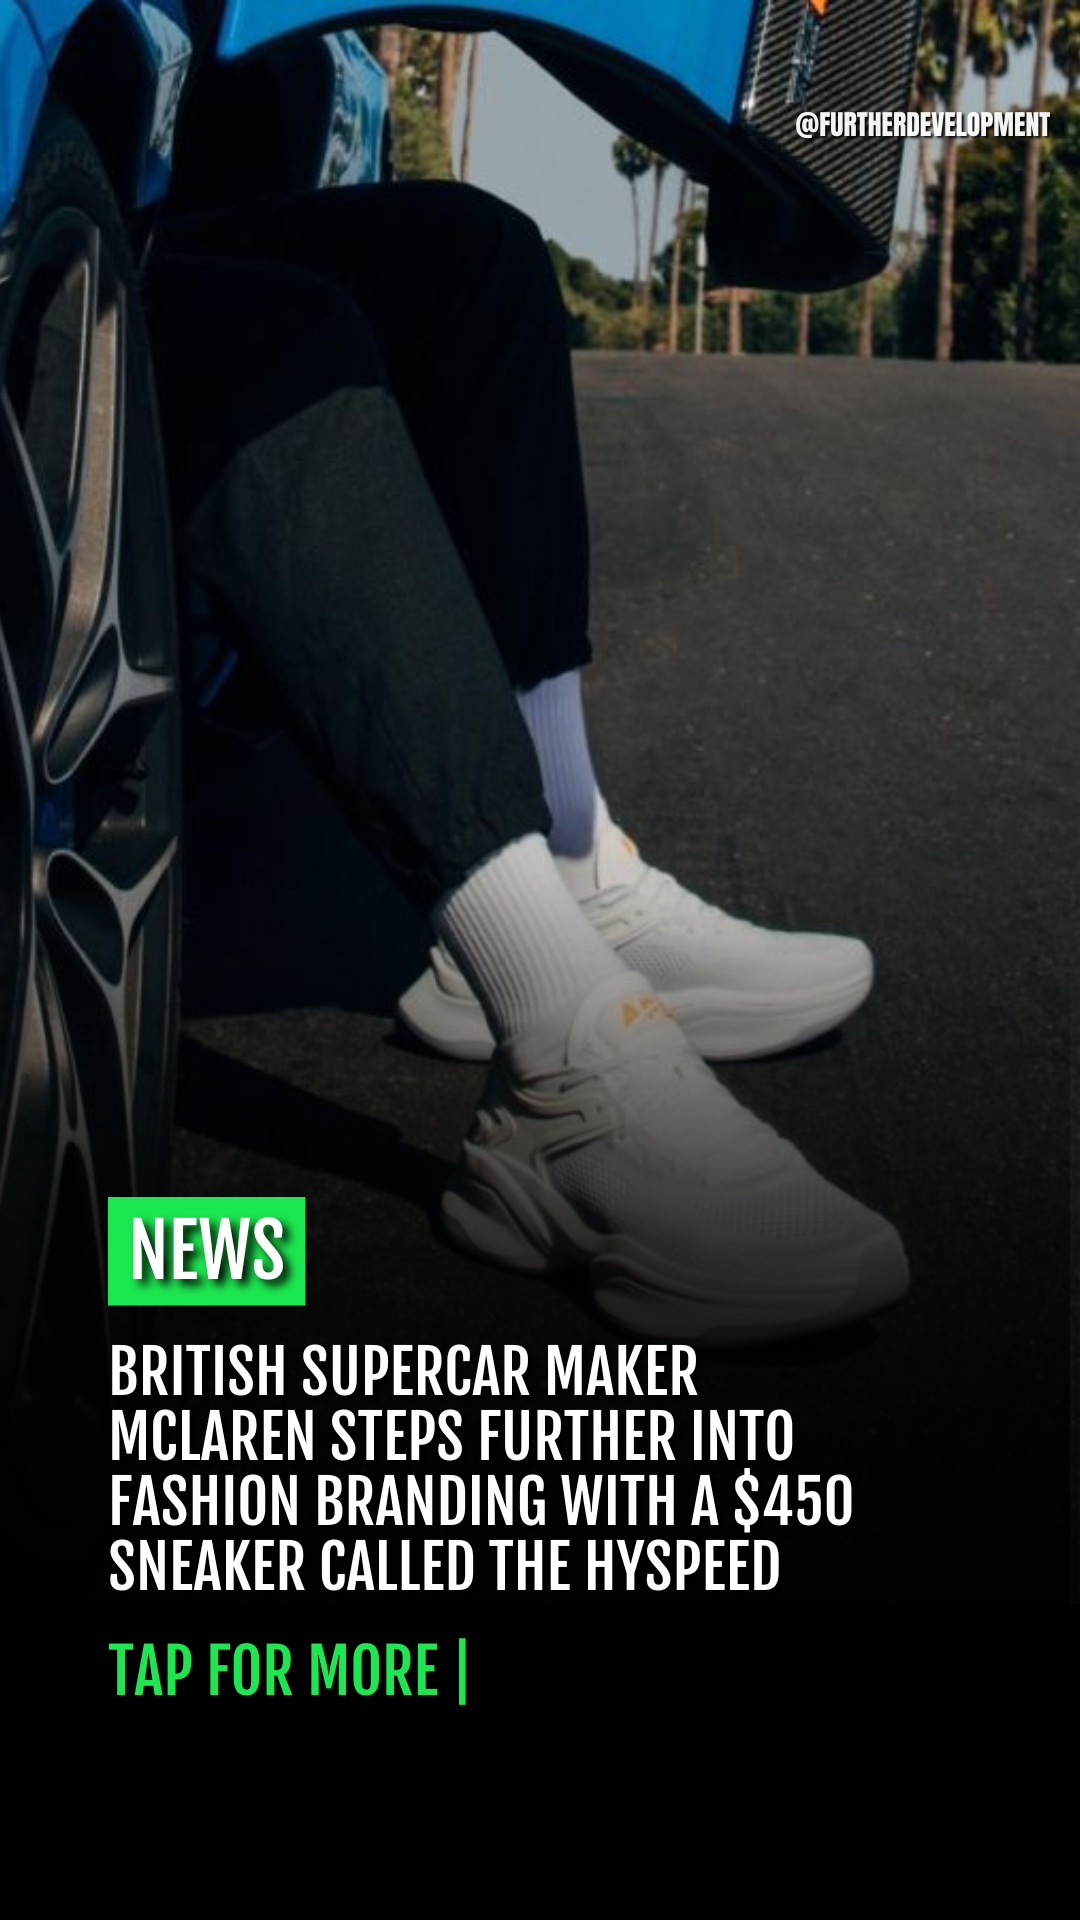 BRITISH SUPERCAR MAKER MCLAREN STEPS FURTHER INTO FASHION BRANDING WITH A $450 SNEAKER CALLED THE HYSPEED